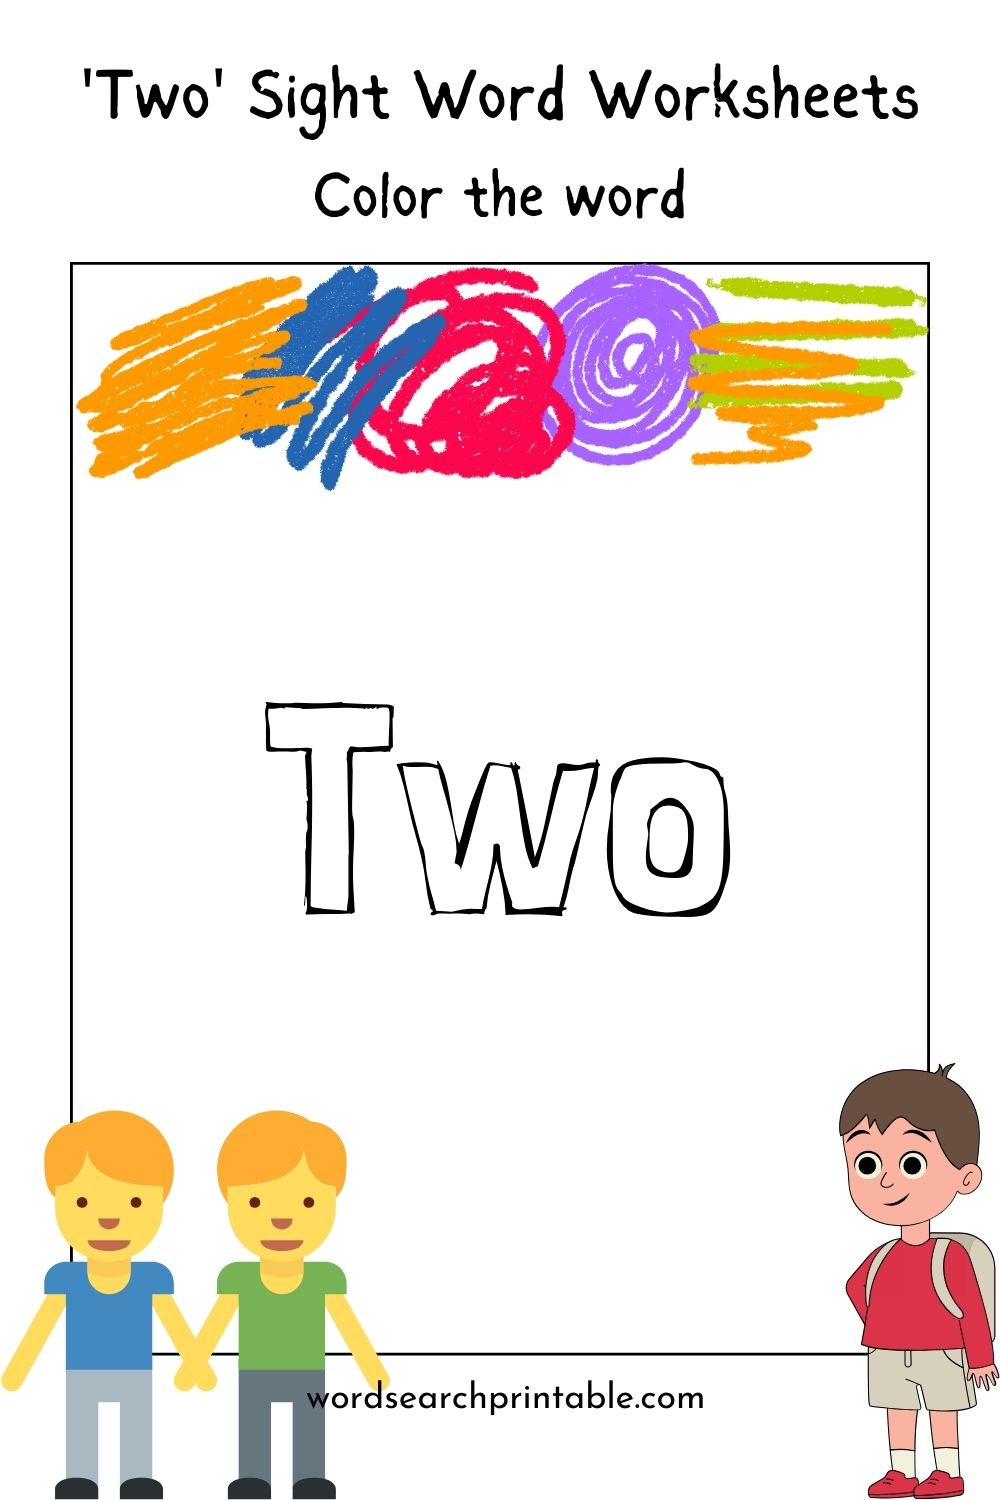 Color the sight word Two